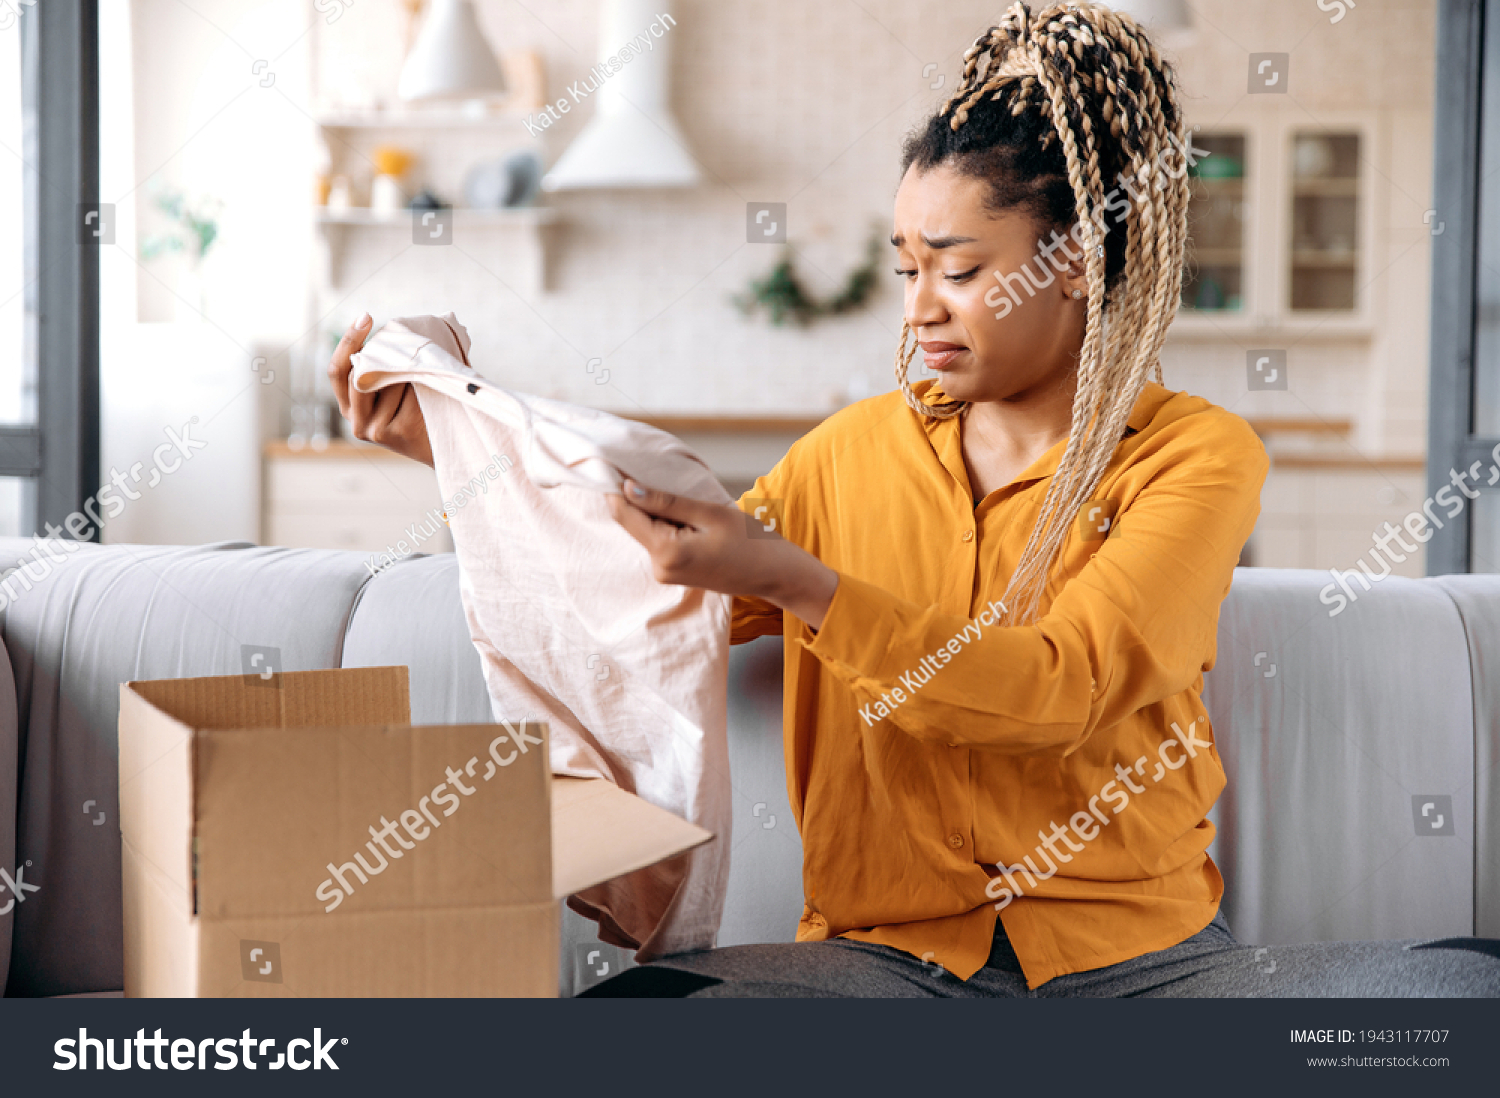 A confused sad african american girl unpacking her parcel at home. Surprised young woman got an unexpected order, girl is upset with her parcel, unsuccessful online shopping. Home delivery #1943117707